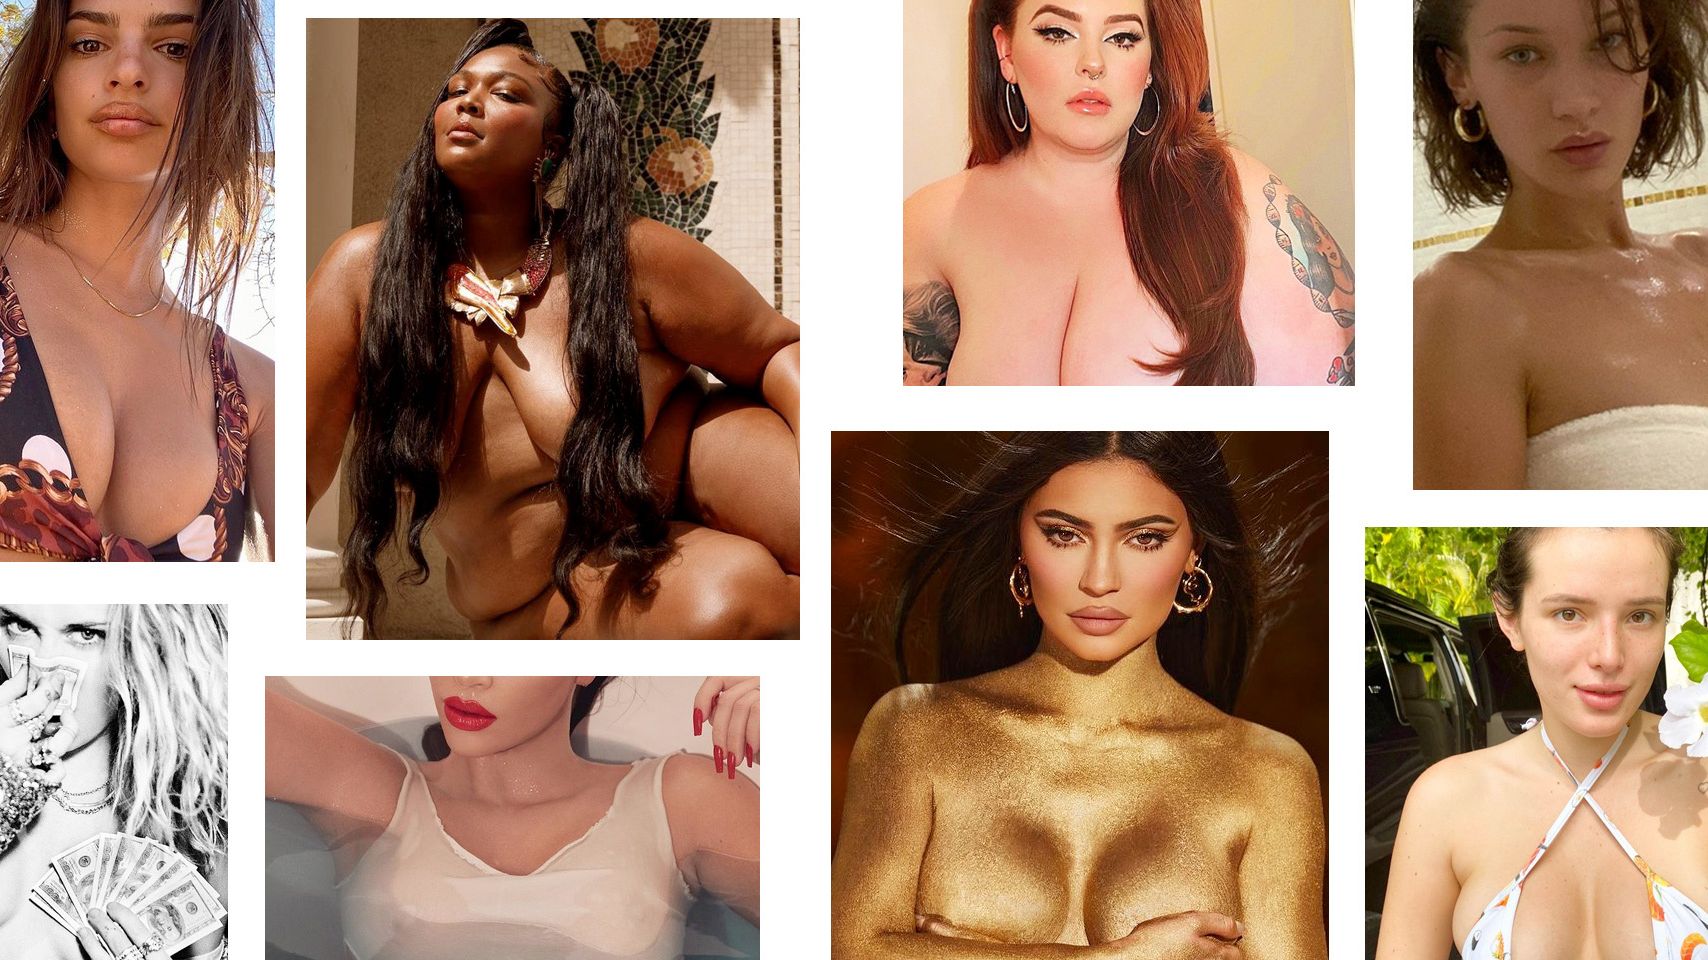 Big Black Boobs Celebrity - 24 Best Celebrity Boobs on Instagram - Celebs Who Posted Pics of Their Boobs